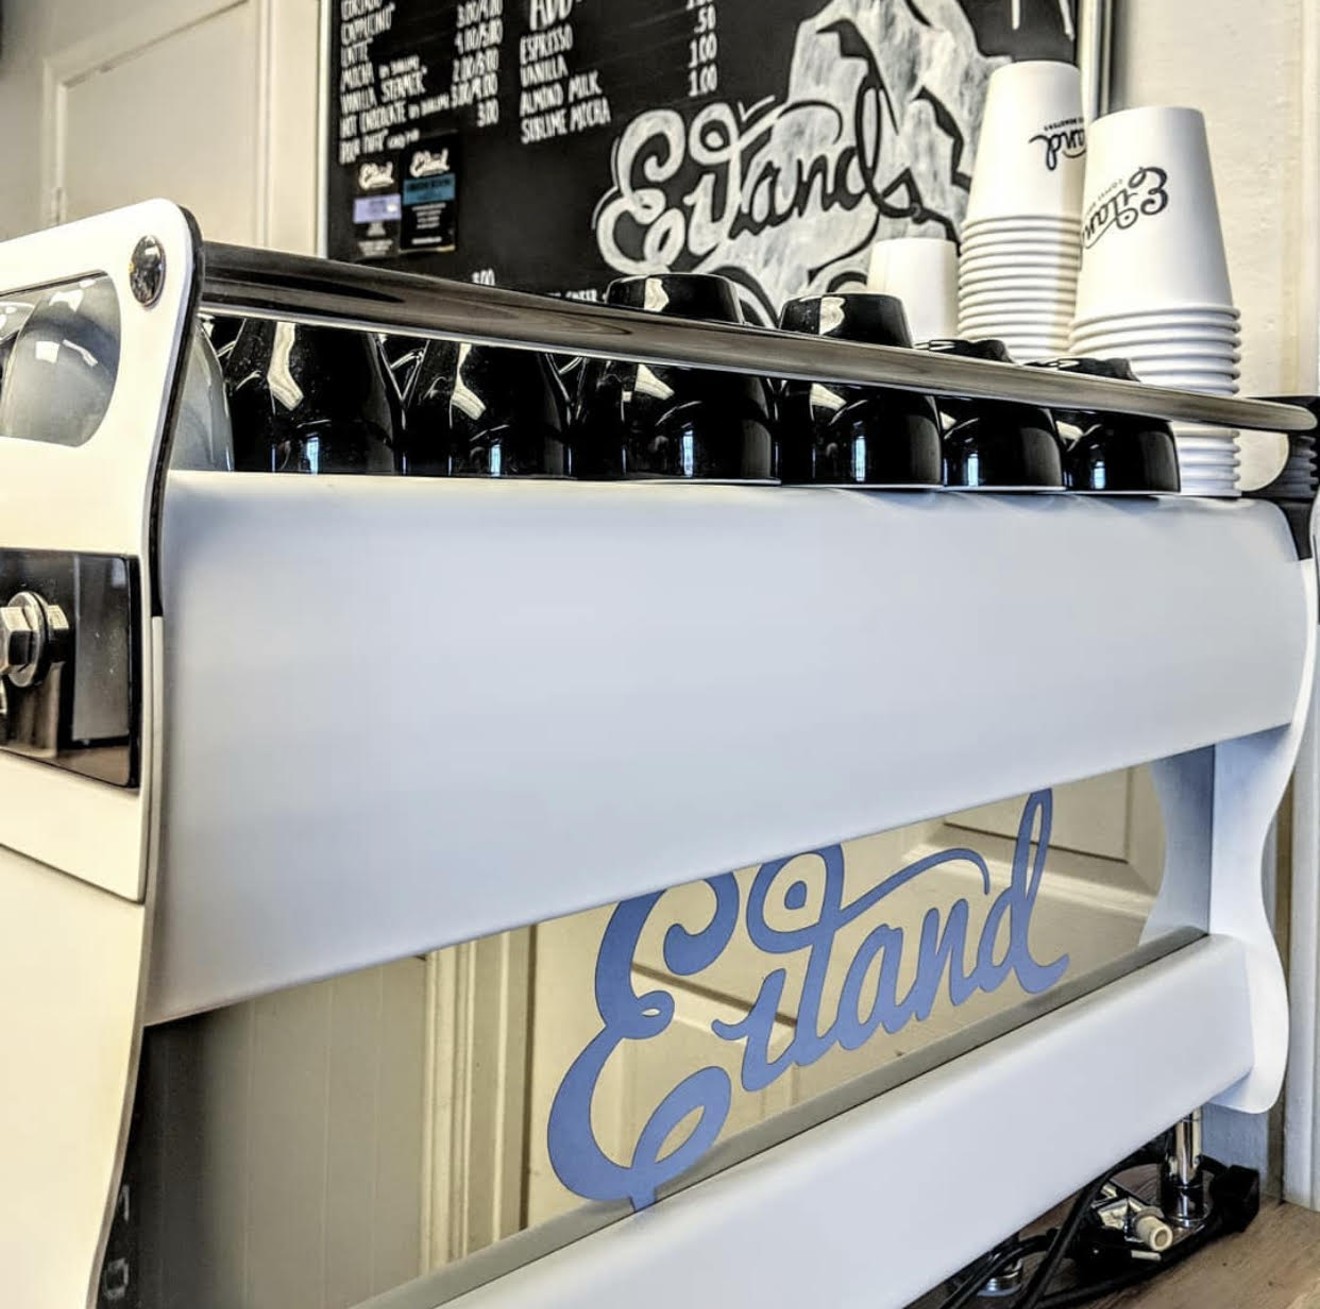 Eiland Coffee Roasters wants to build a state-of-the-art, three-story roastery and cafe in Richardson — but the Richardson City Council denied the coffee brand's proposal for its new location.